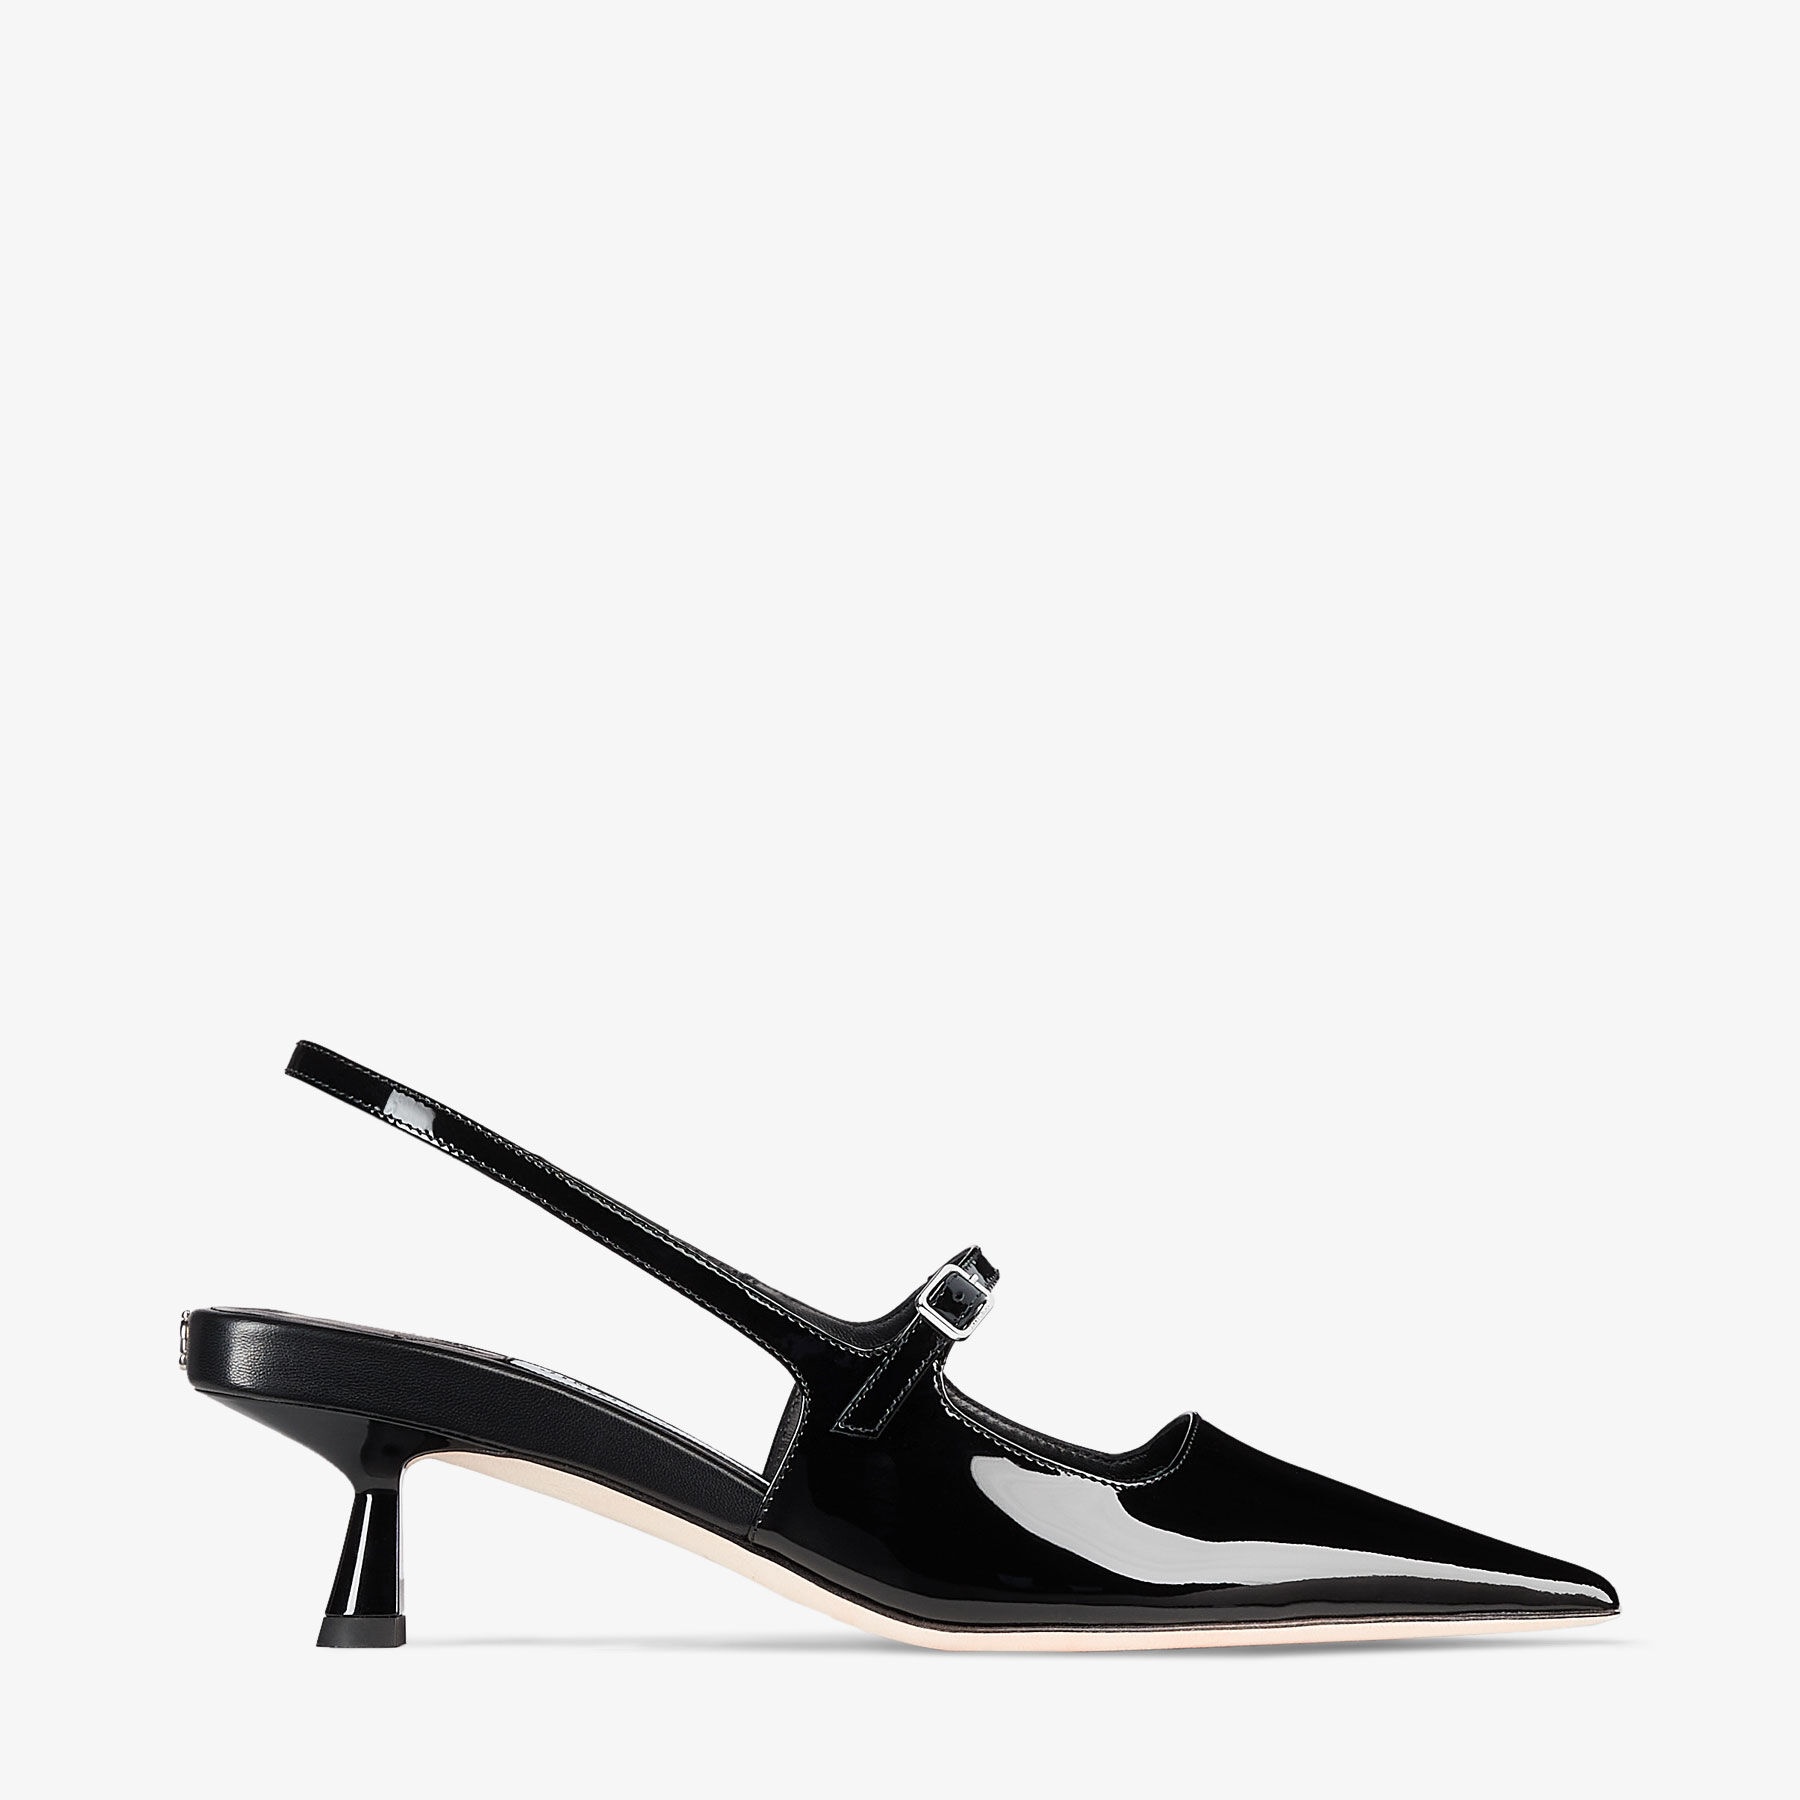 Didi 45
Black Patent Leather Pointed Pumps - 1